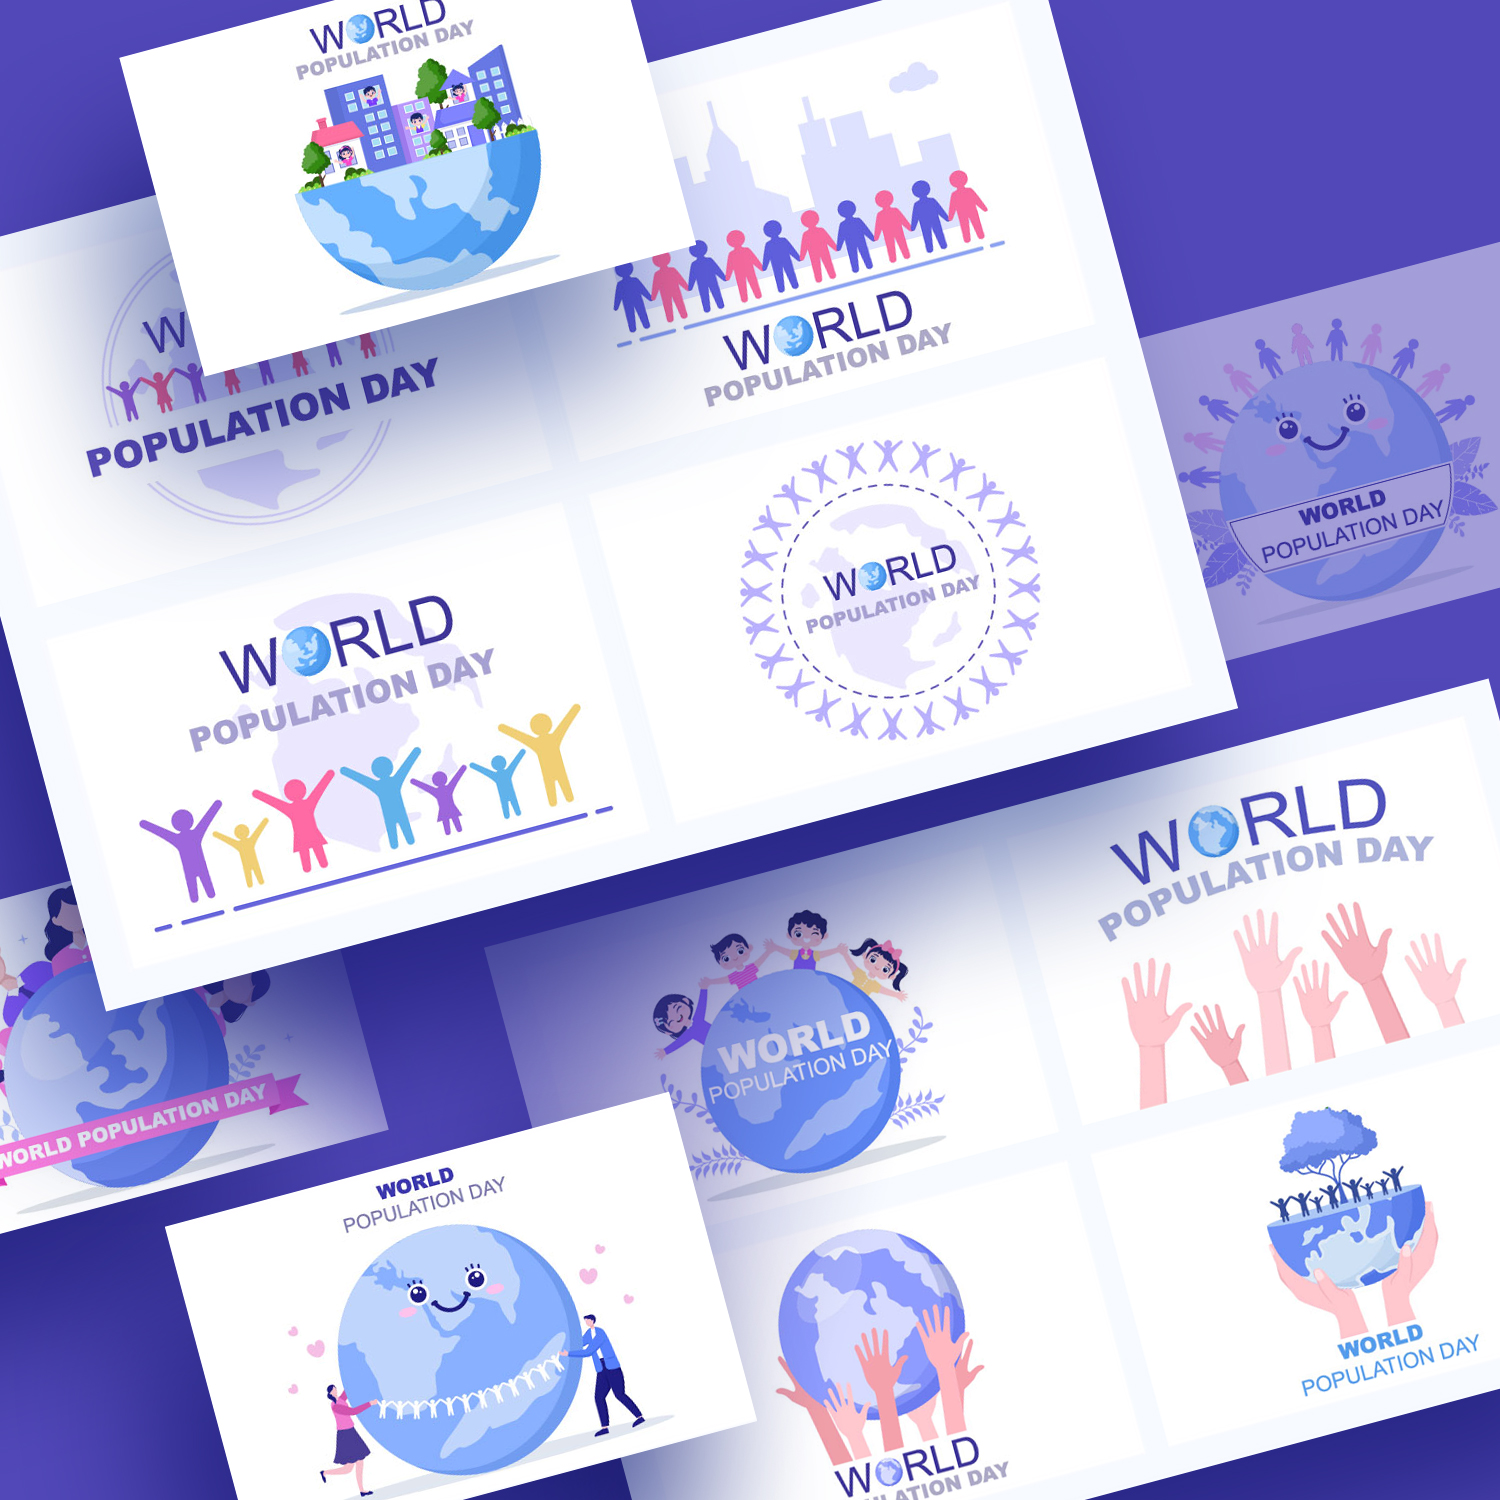 15 World Population Day Illustrations cover image.